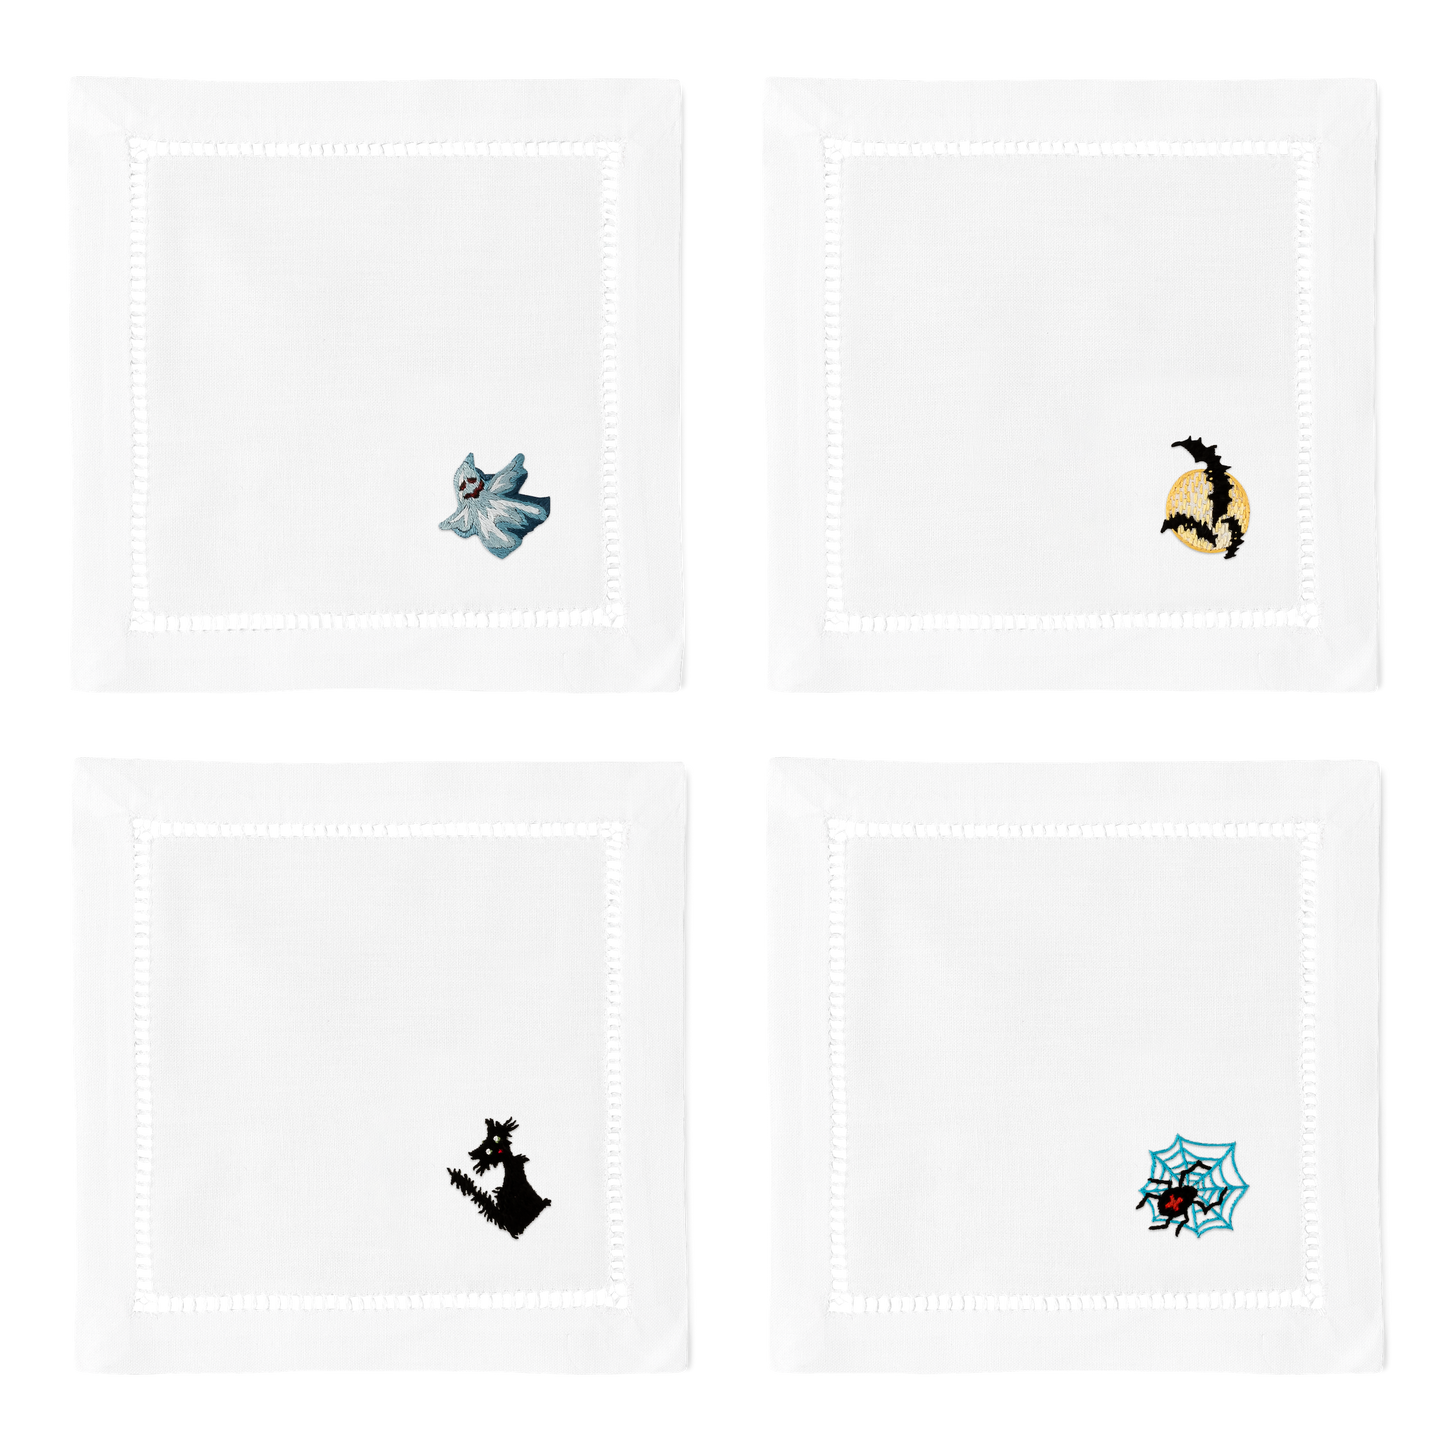 4 white cocktail napkins. Embroidered in the bottom right corner of each is a ghost, 3 bats, a black cat, and a spider. 